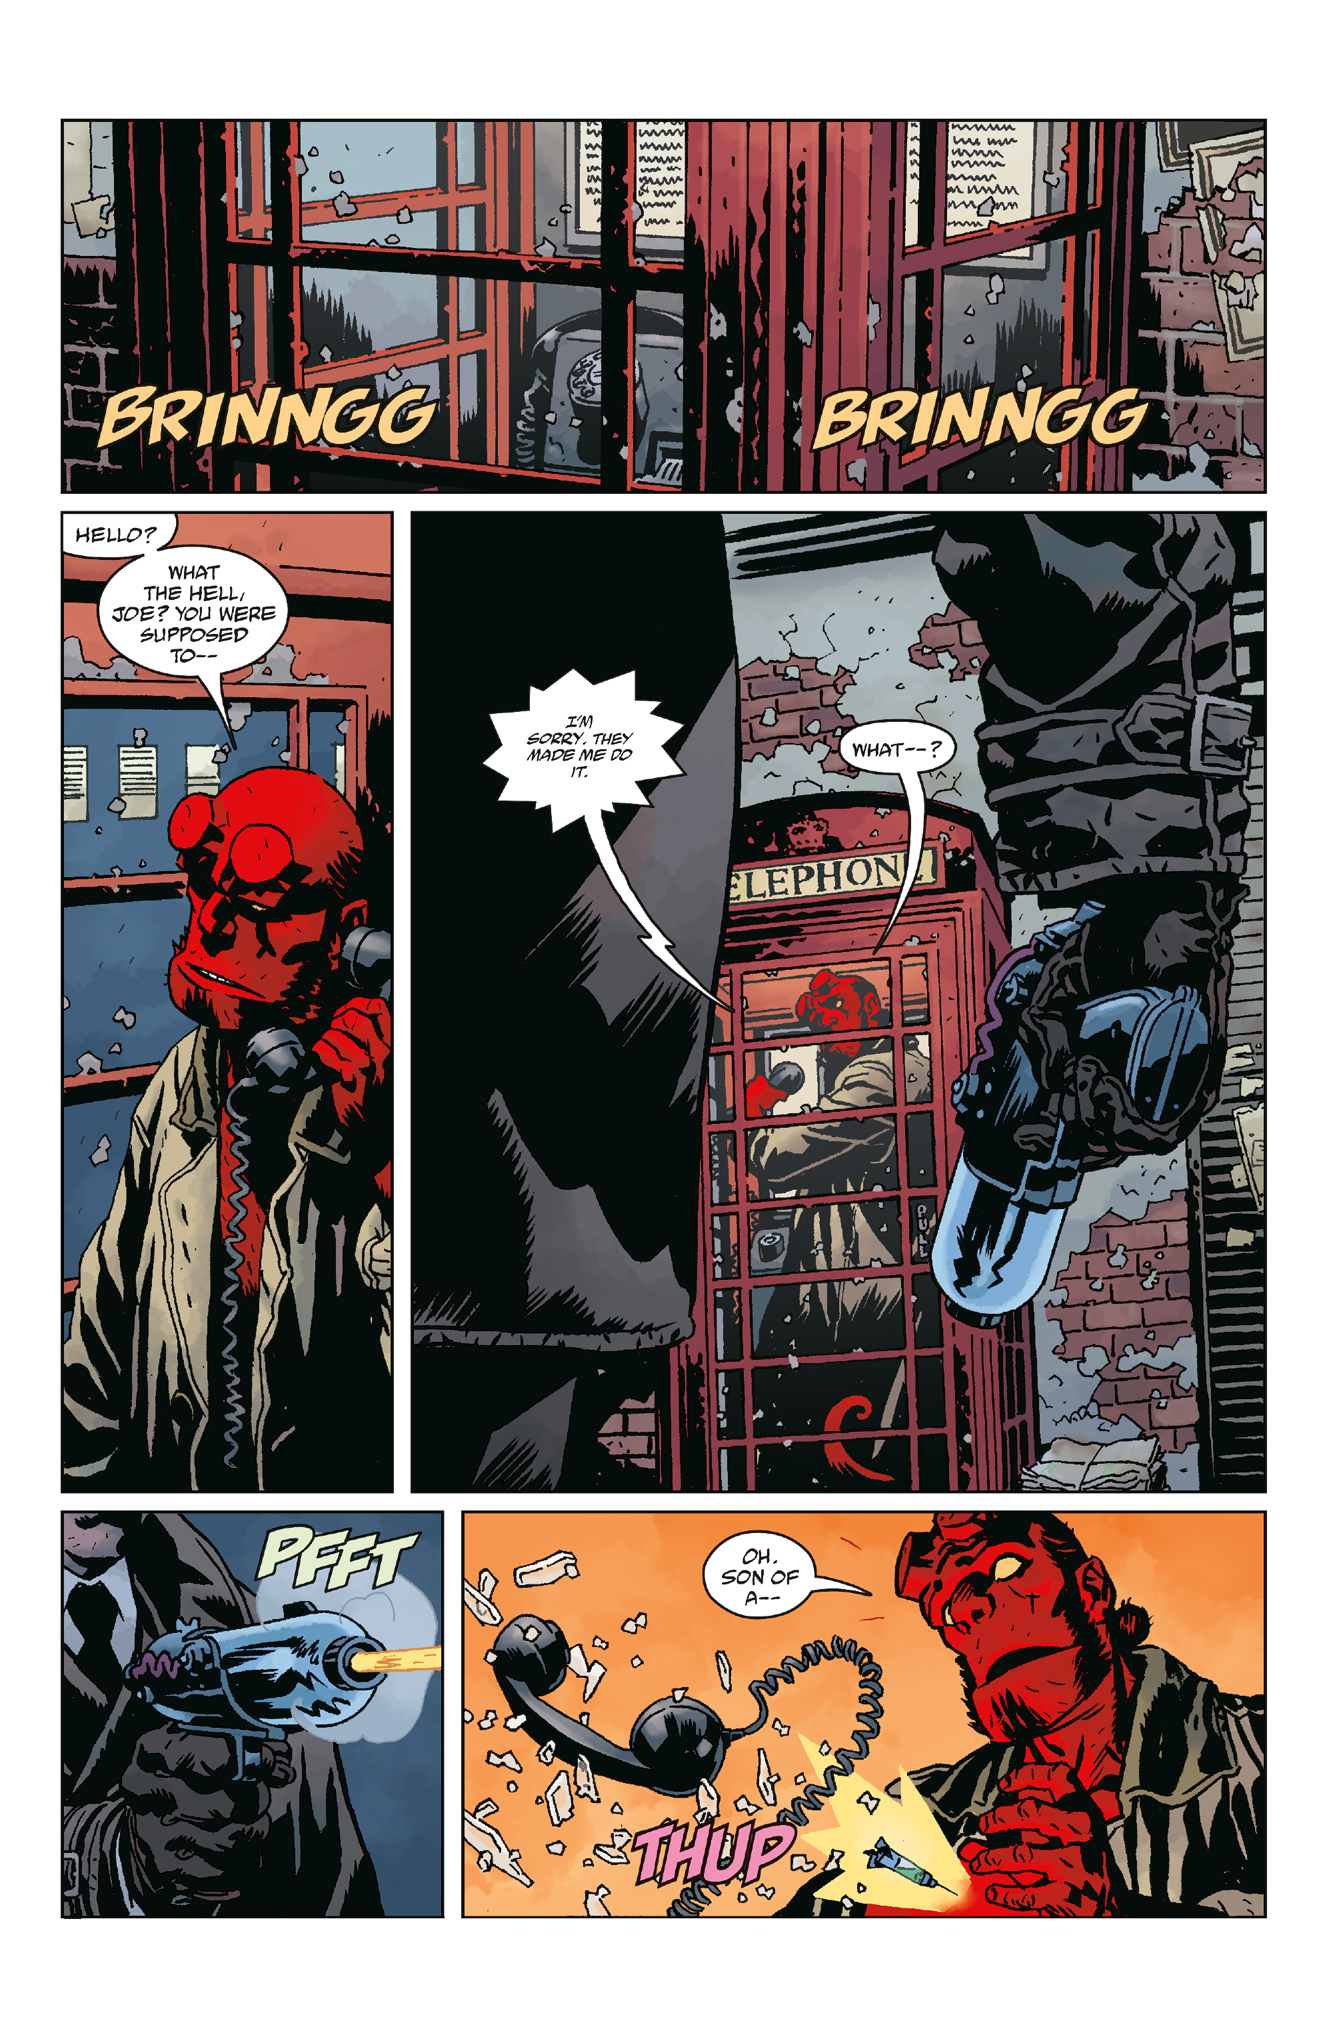 INTERVIEW: Inside GIANT ROBOT HELLBOY with Duncan Fegredo